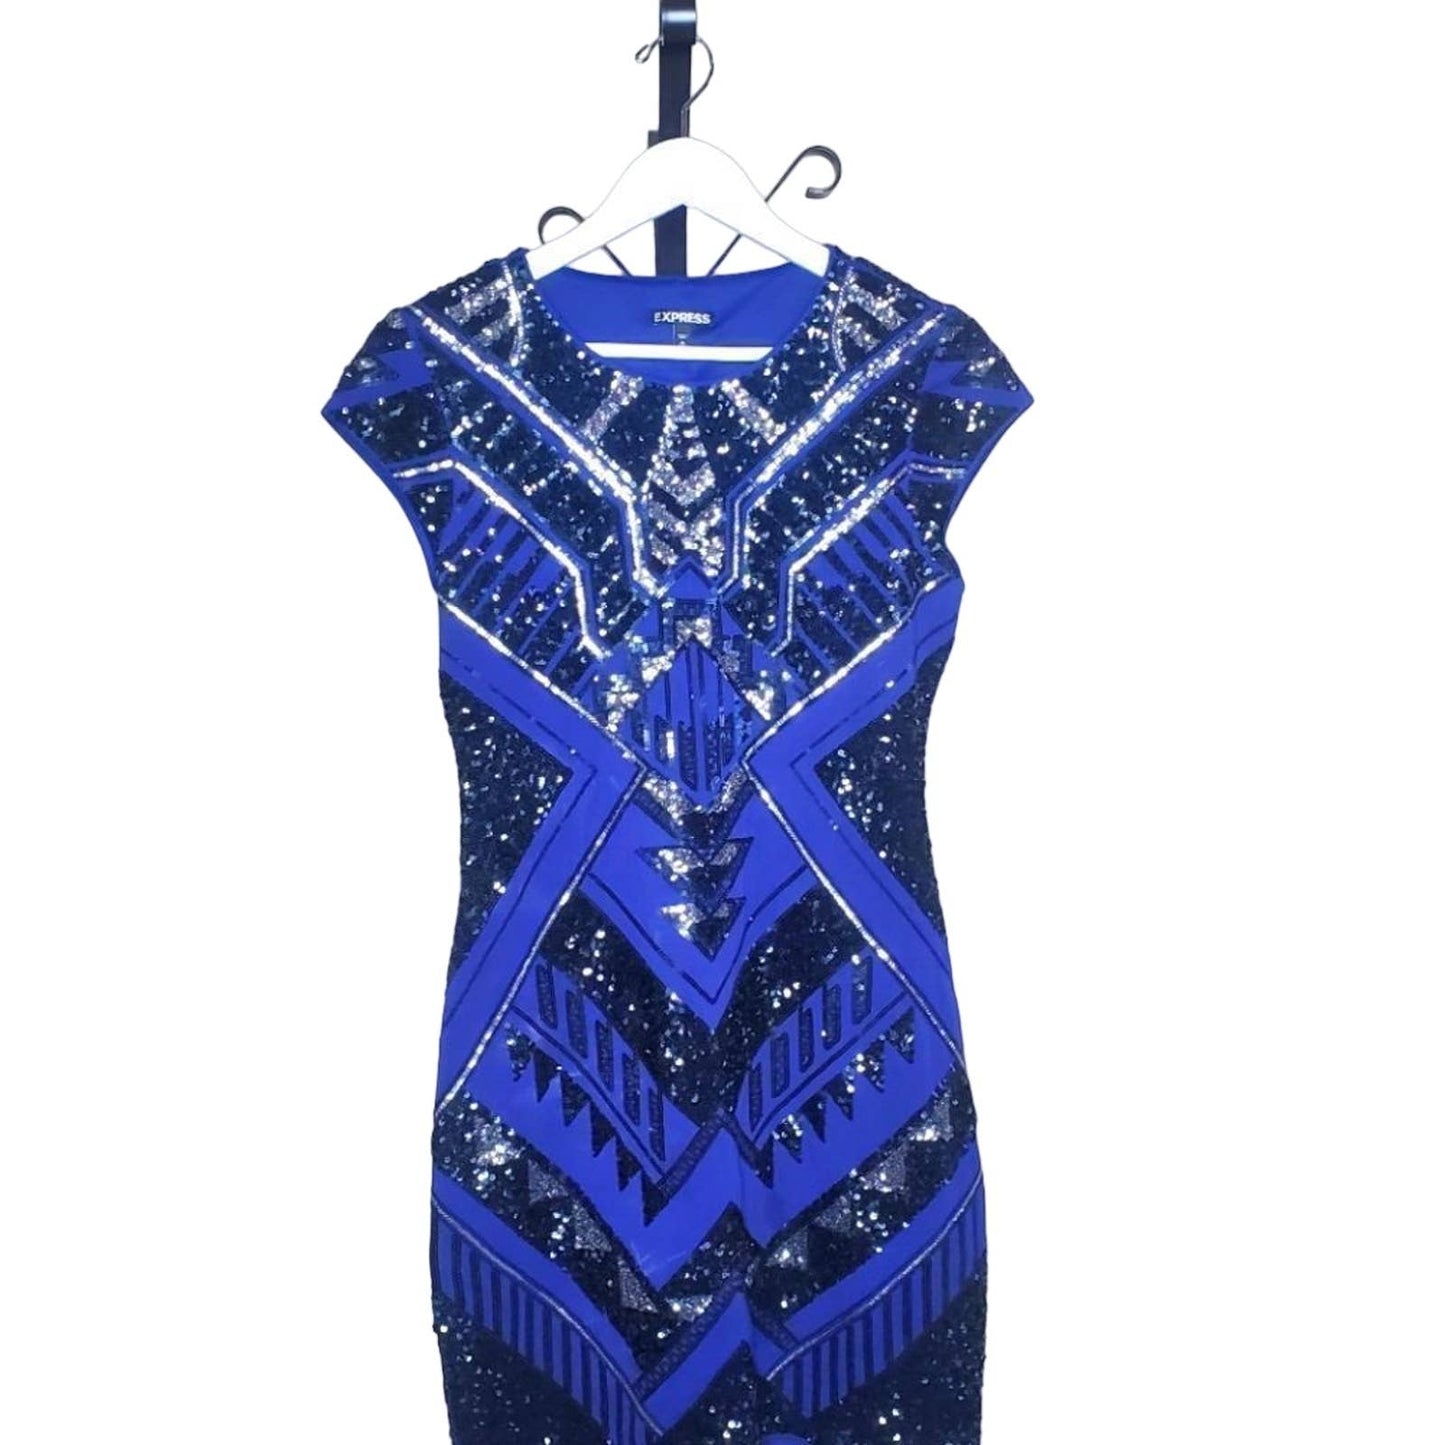 Express Navy with Black and Silver Sequin Detail, Size Medium